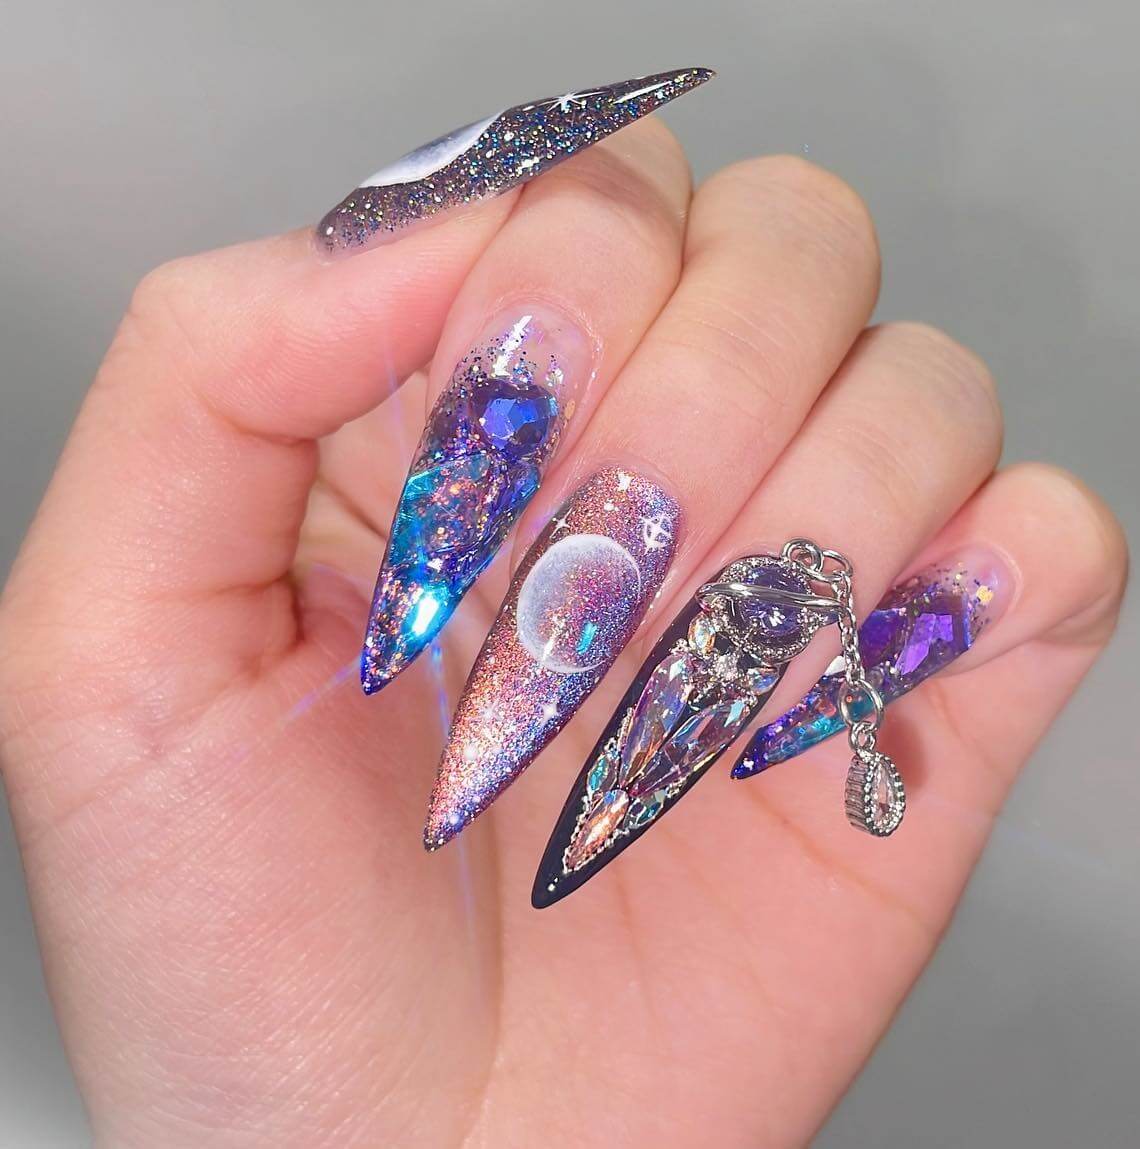 30 Incredibly Breathtaking Galaxy Nails That Take Your Manicure Up A Notch - 195